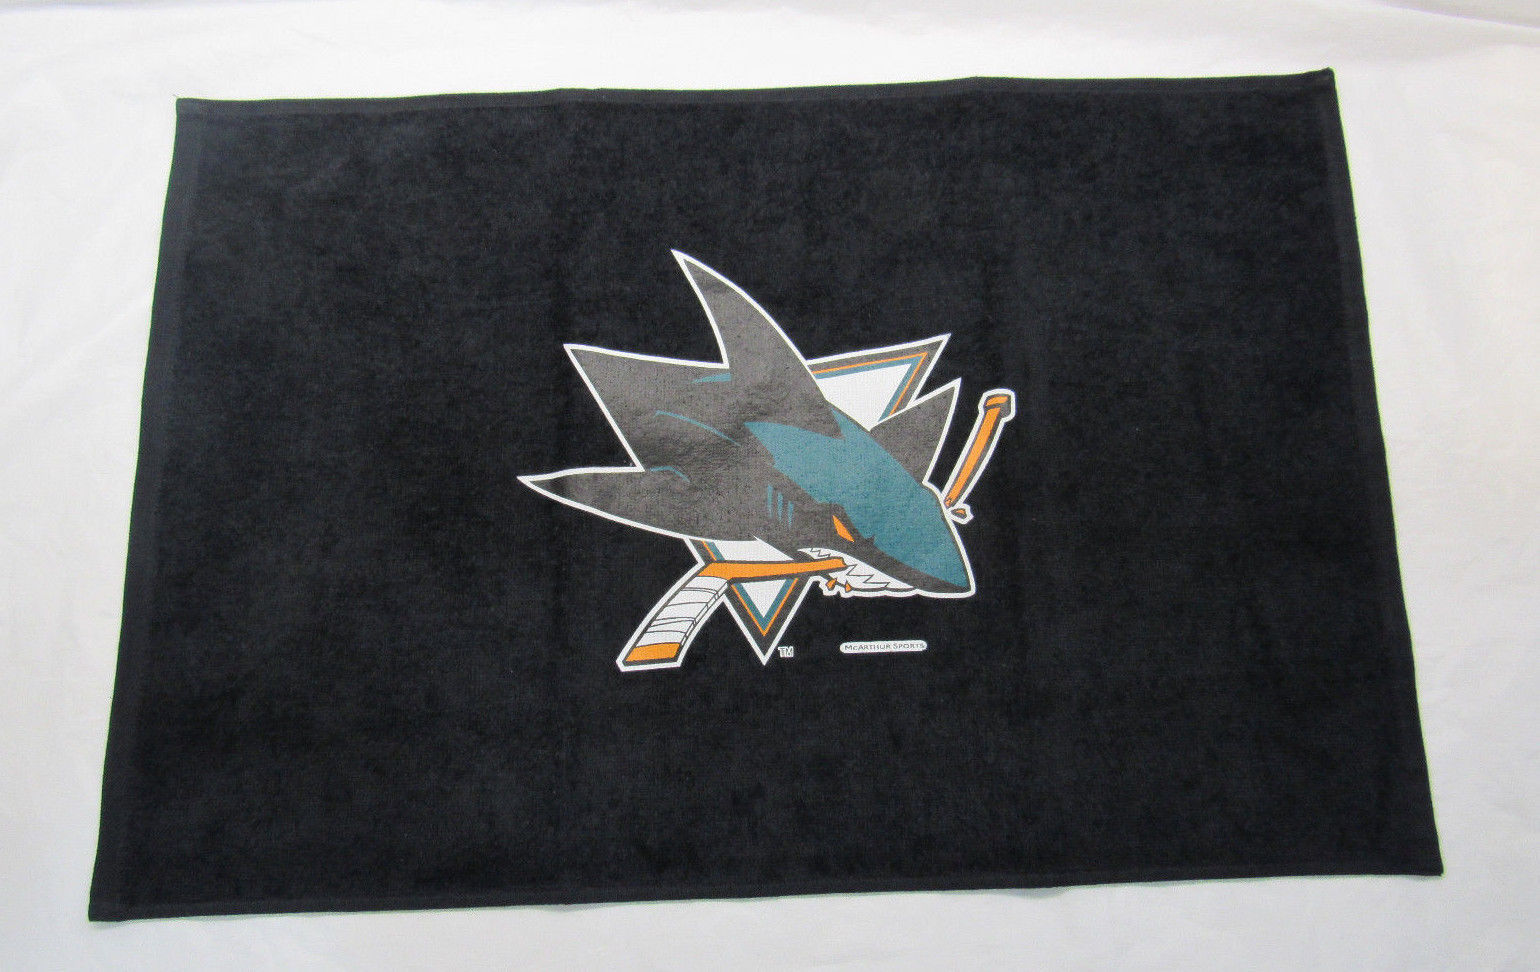 Primary image for NHL San Jose Sharks Sports Fan Towel Black 15" by 25" by WinCraft